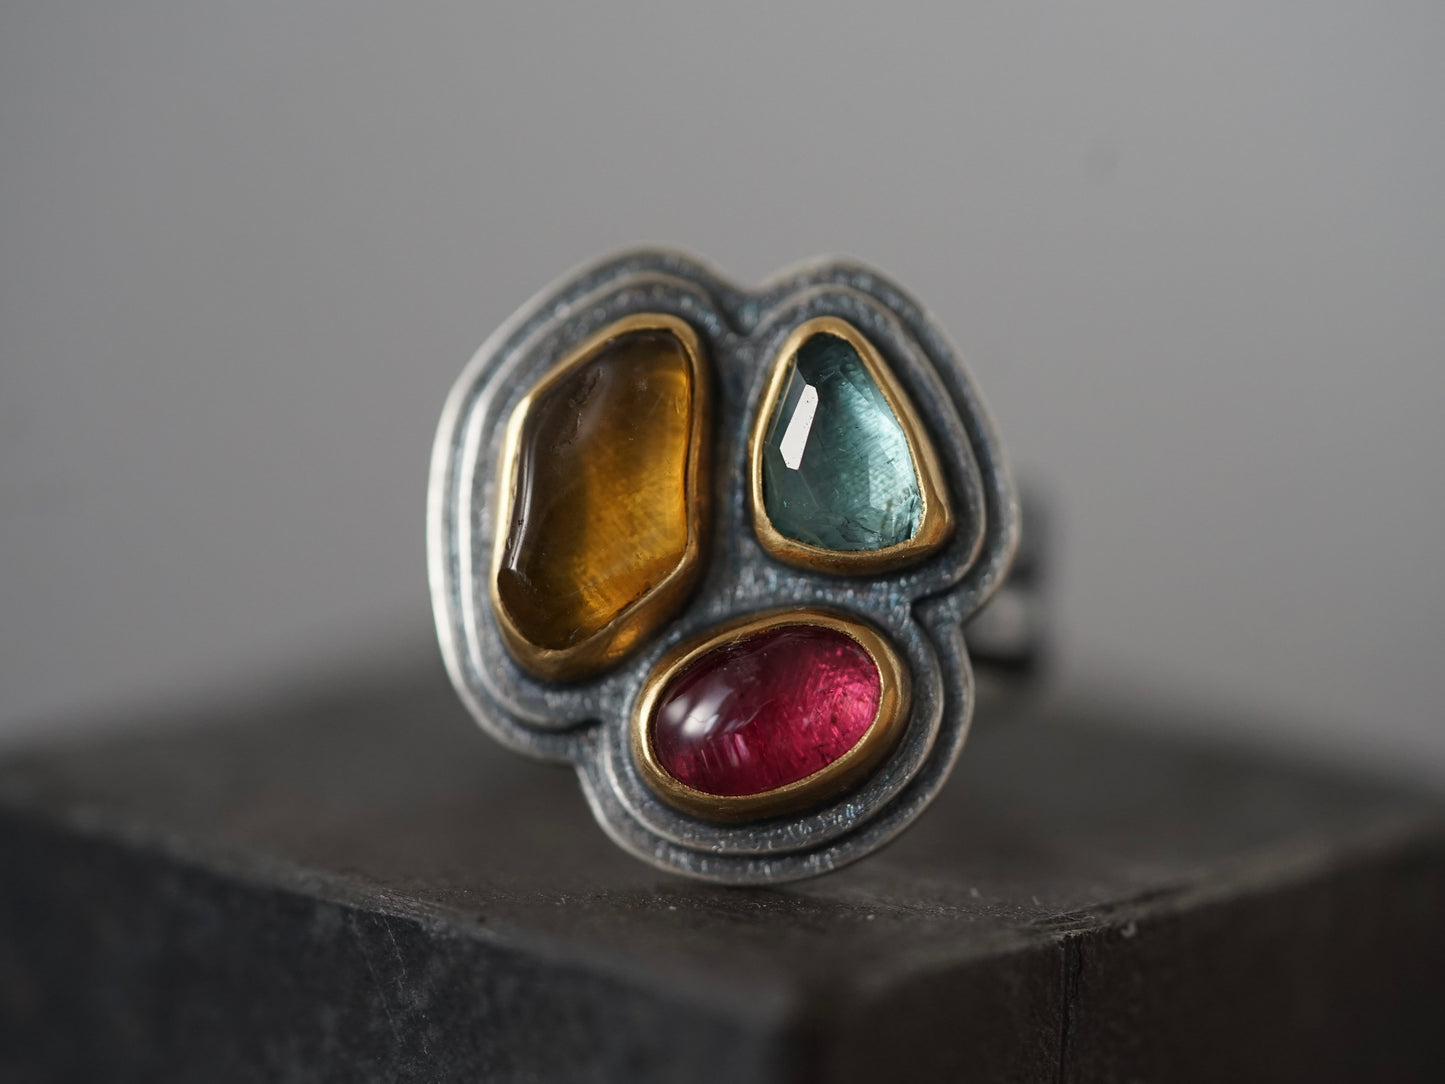 Exquisite, colorful tourmaline statement ring, size 7.25